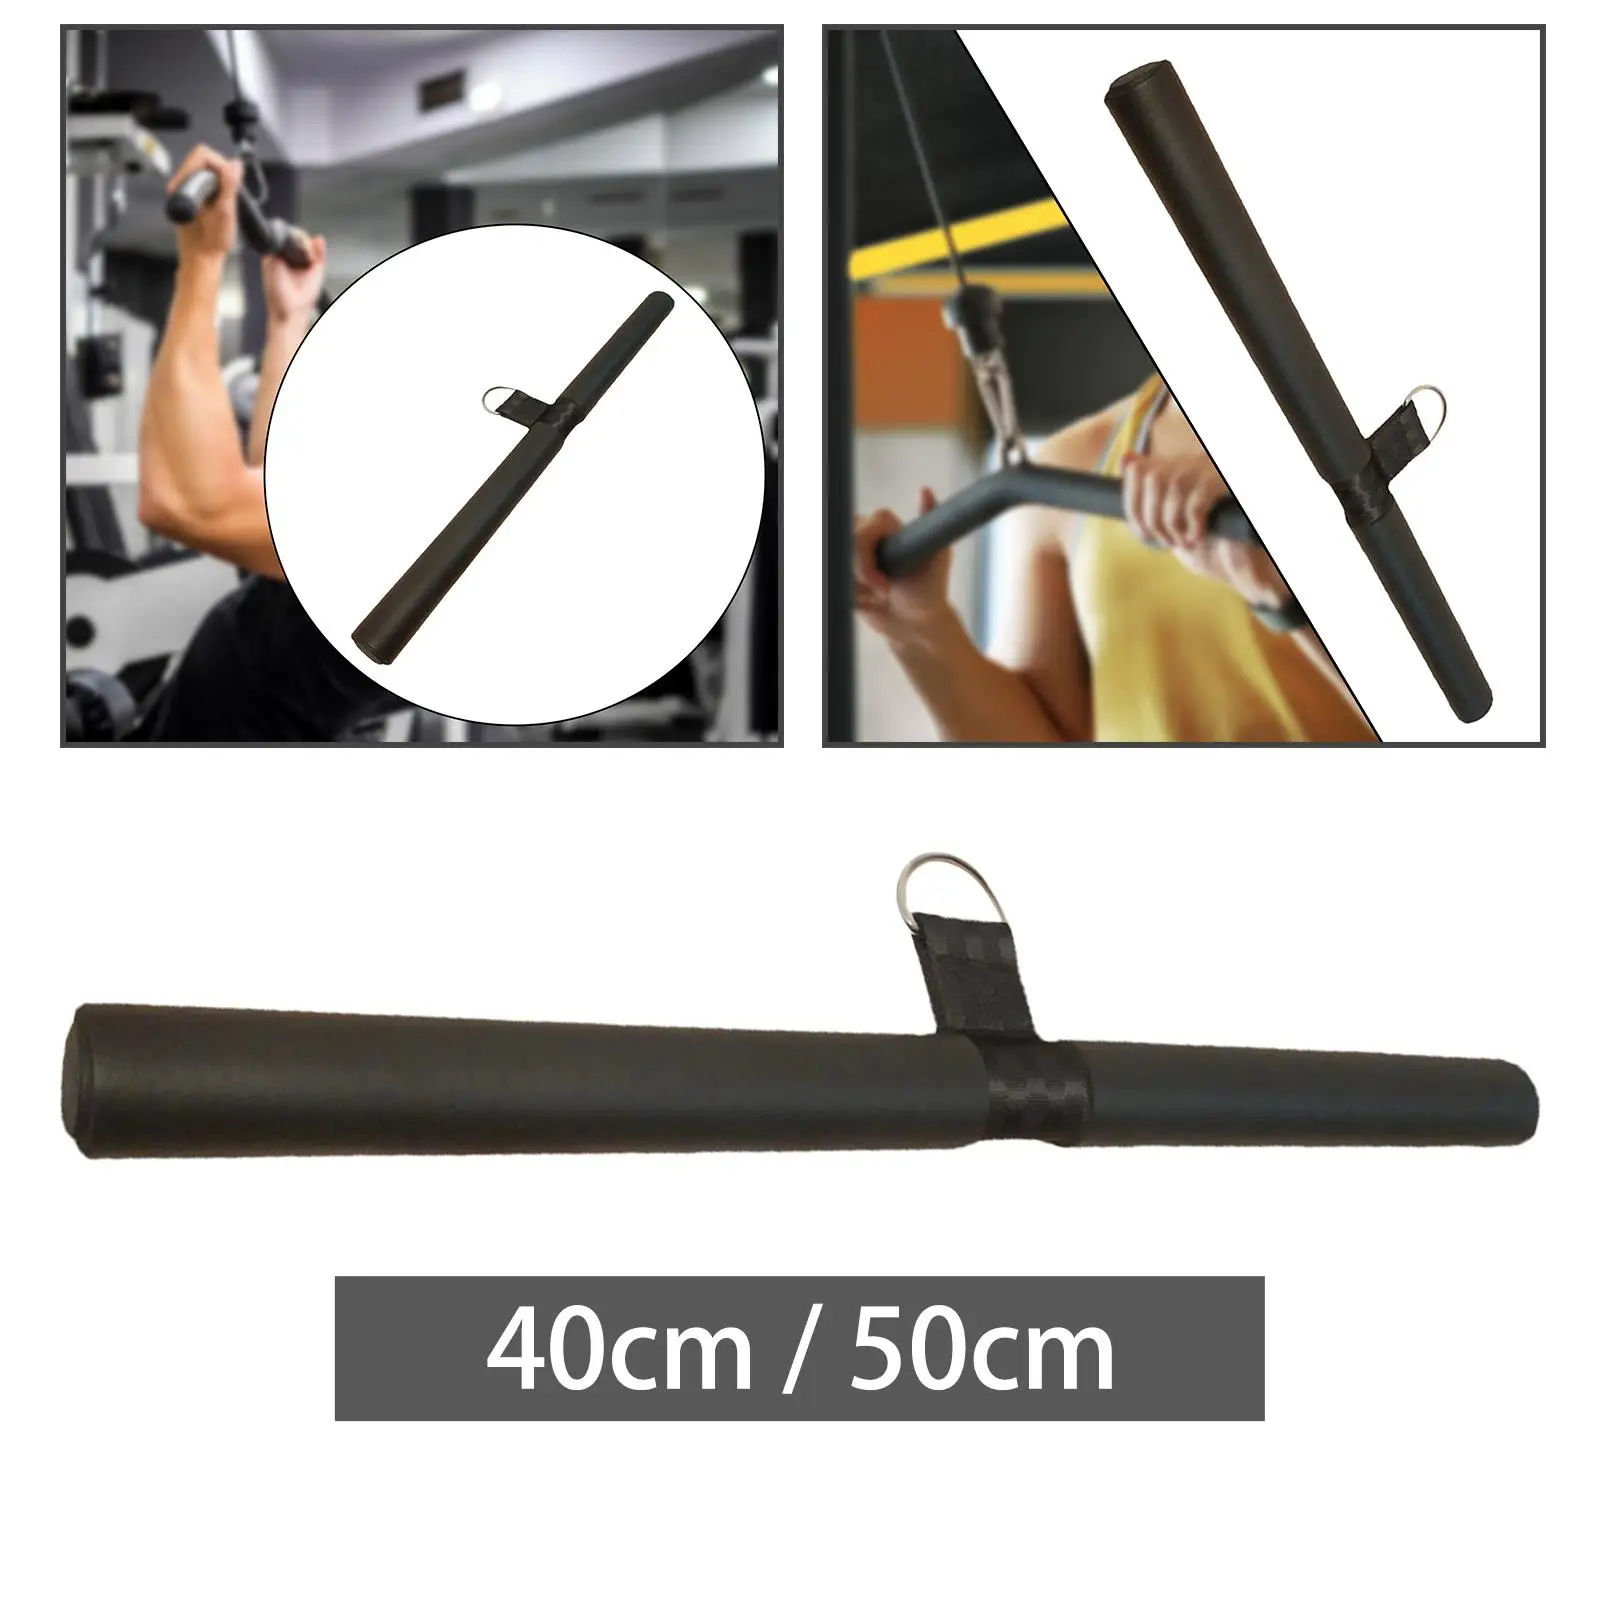 LAT Pull Down Bar for Cable Pulley System Muscle Exerciser Strength Training